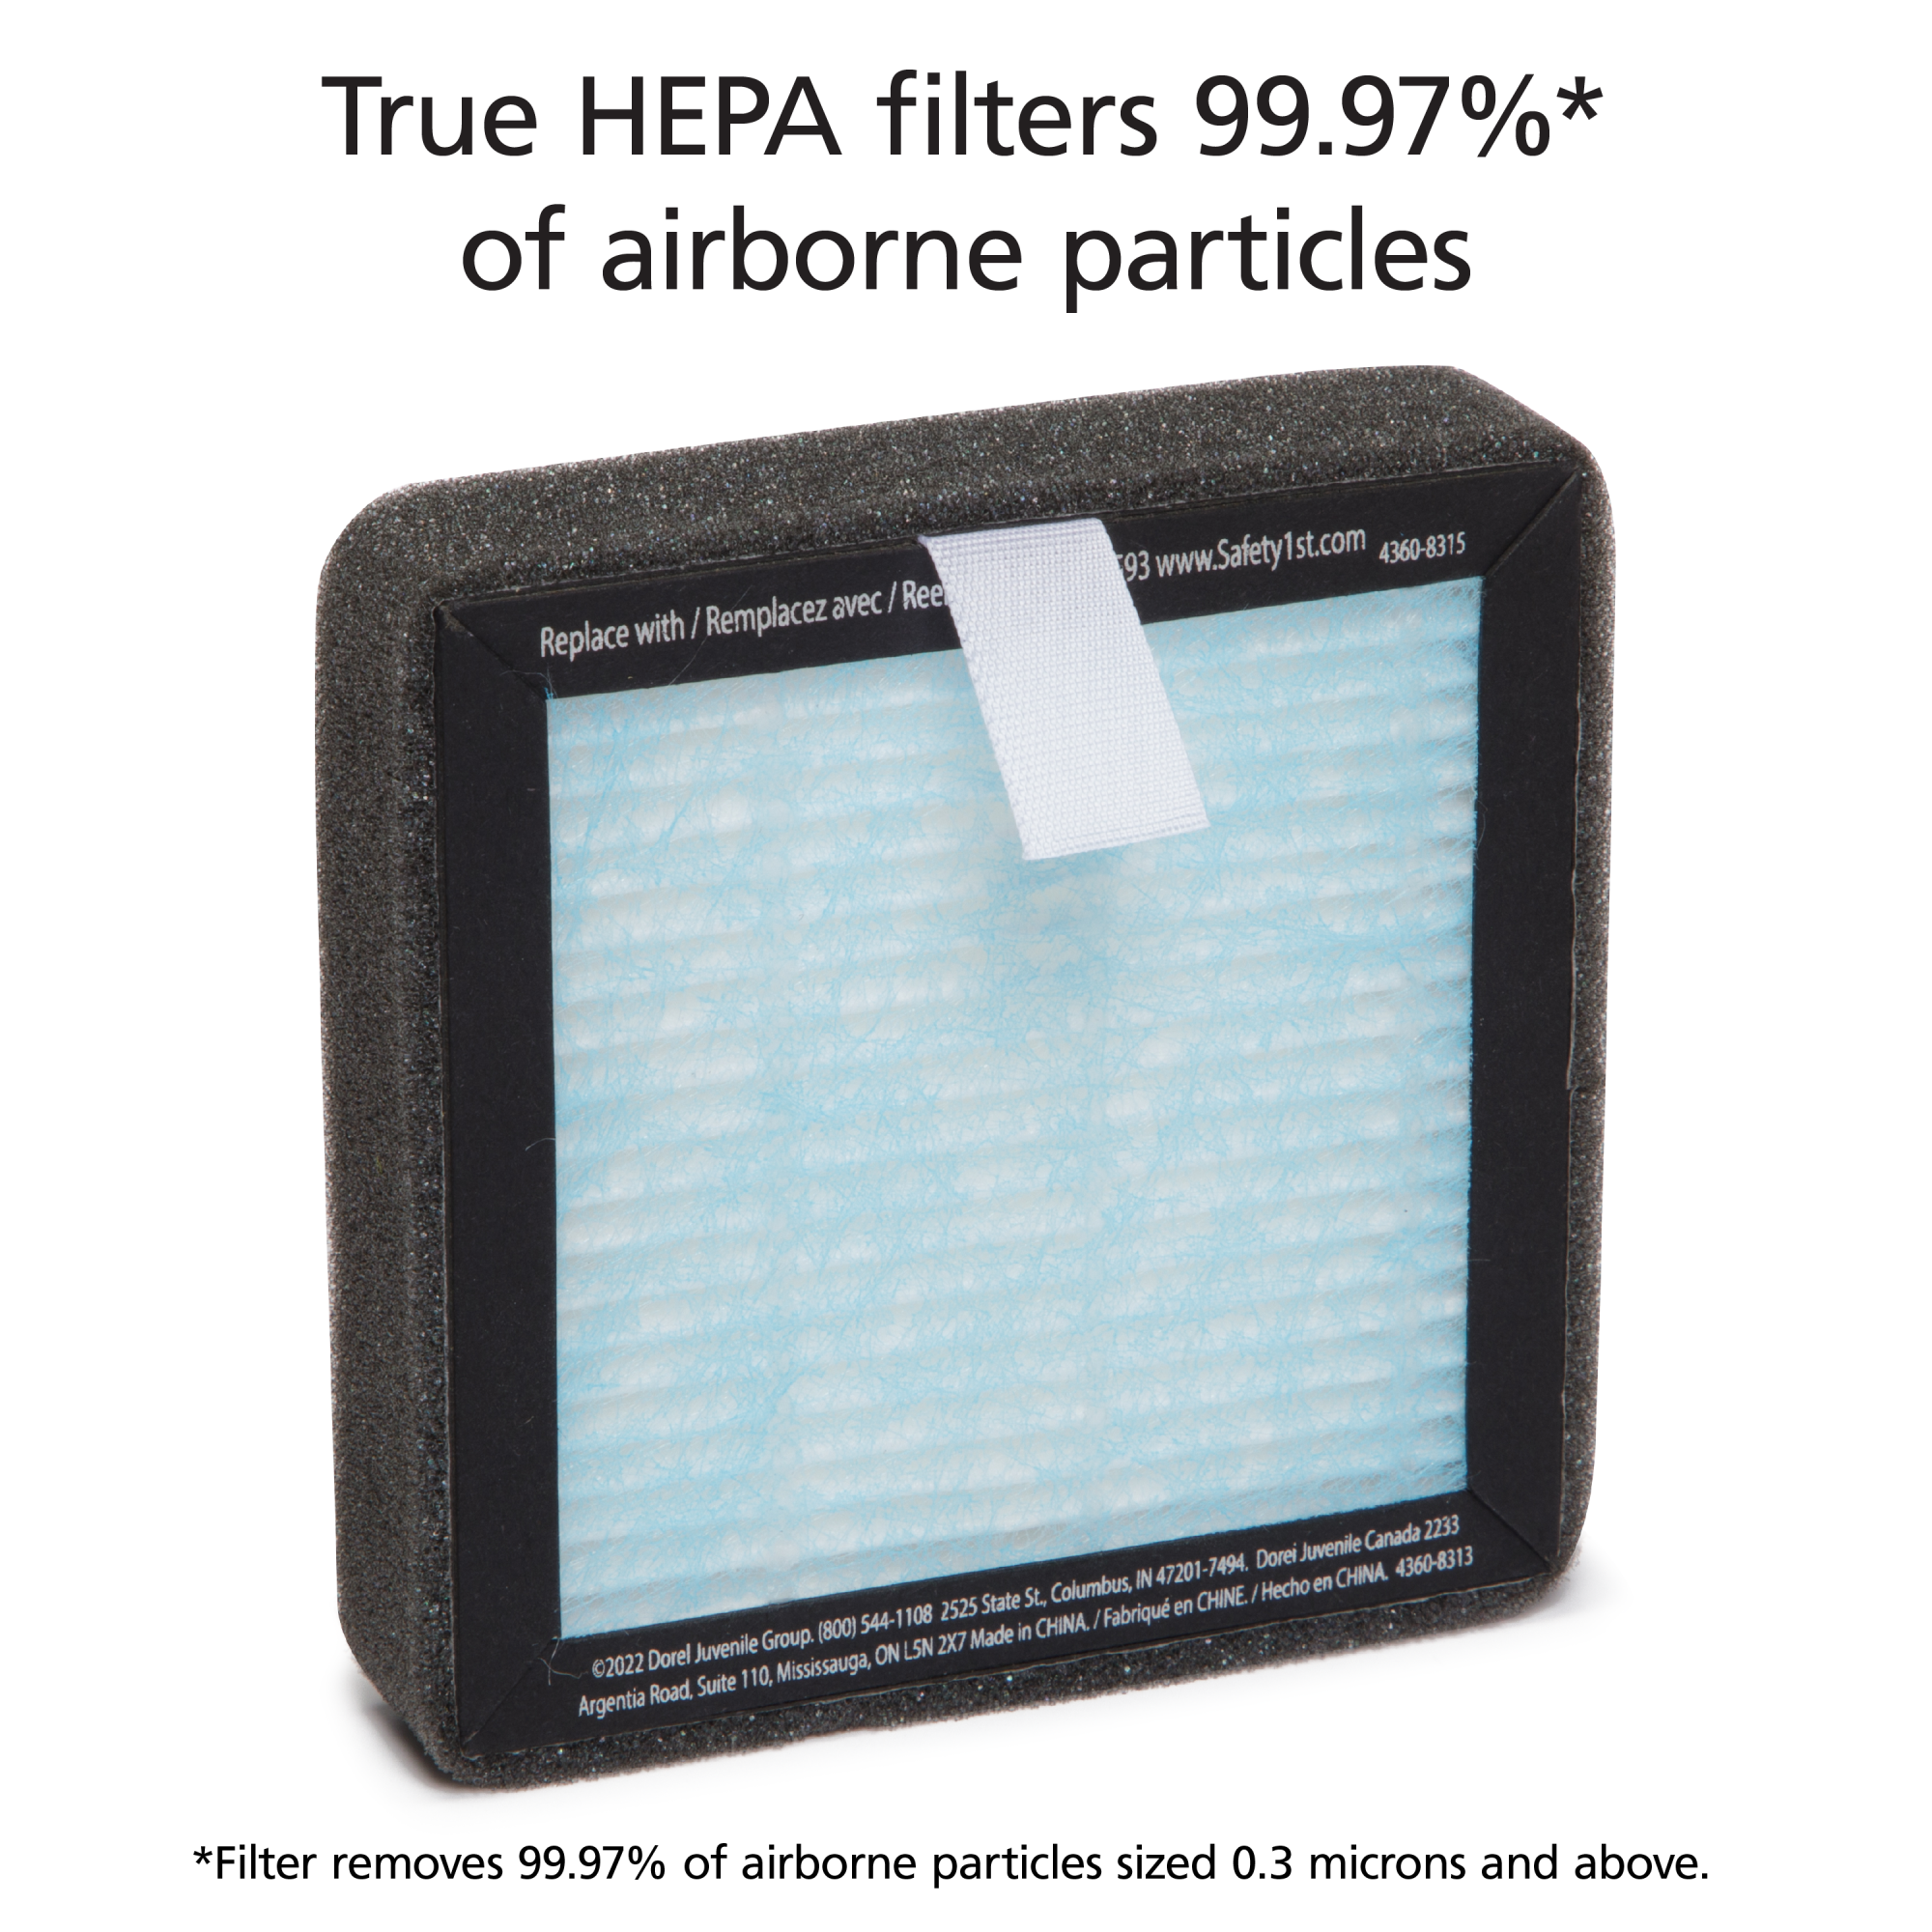 True HEPA Air Purifier Replacement Filter - true HEPA filters 99.97% of airborne particles